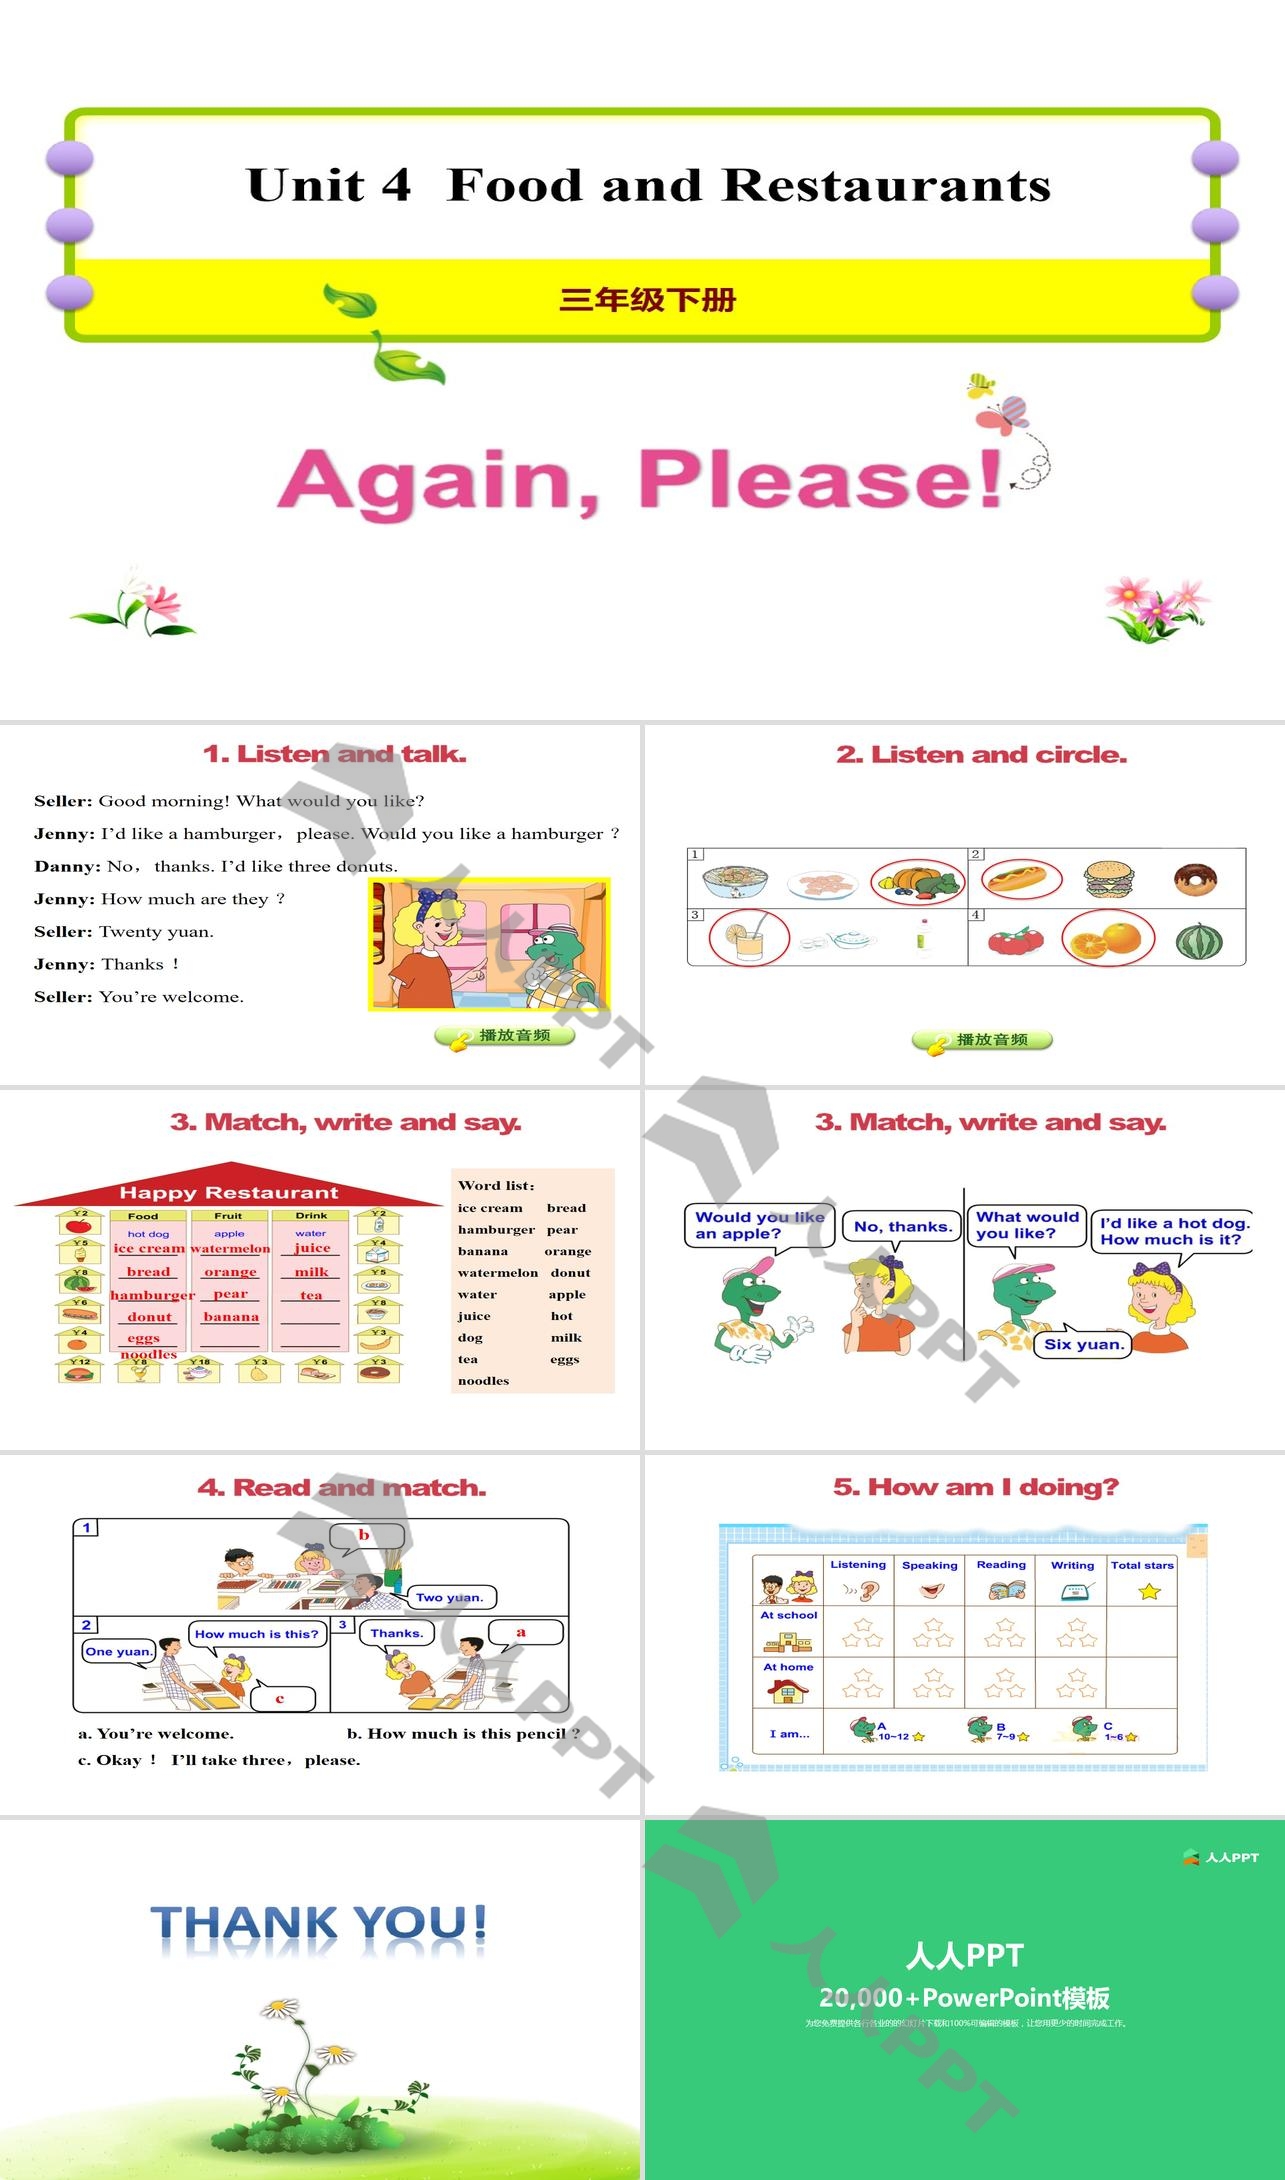 《Again,Please!》Food and Restaurants PPT长图